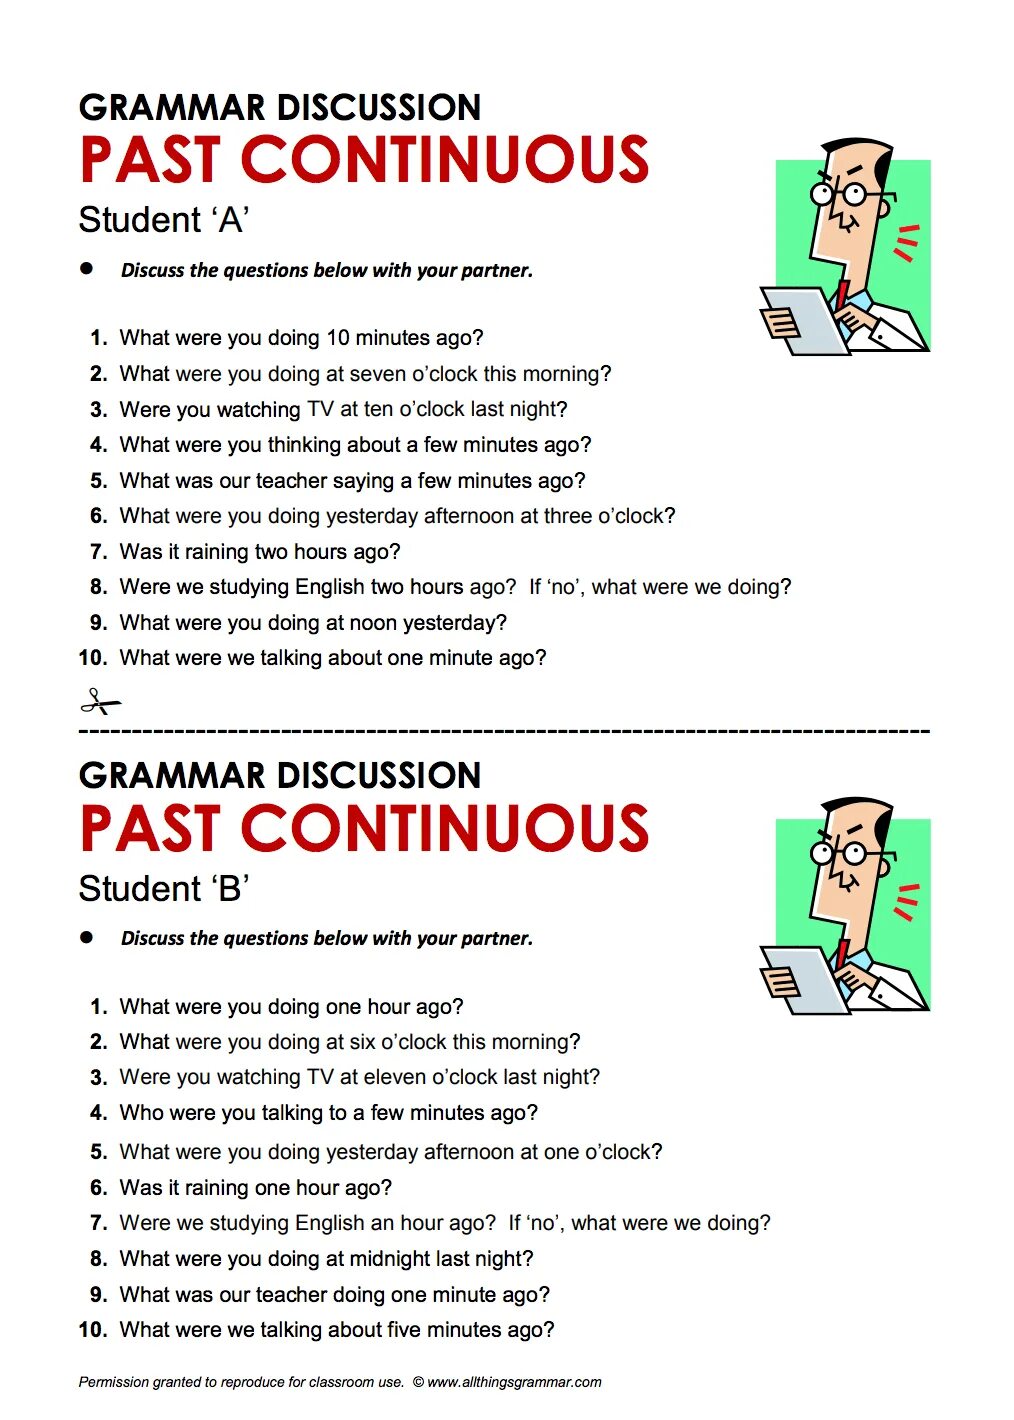 Past simple past continuous exercise pdf. Grammar discussion past Continuous. Past Continuous speaking. Past Continuous speaking Cards. Past Continuous speaking activities.